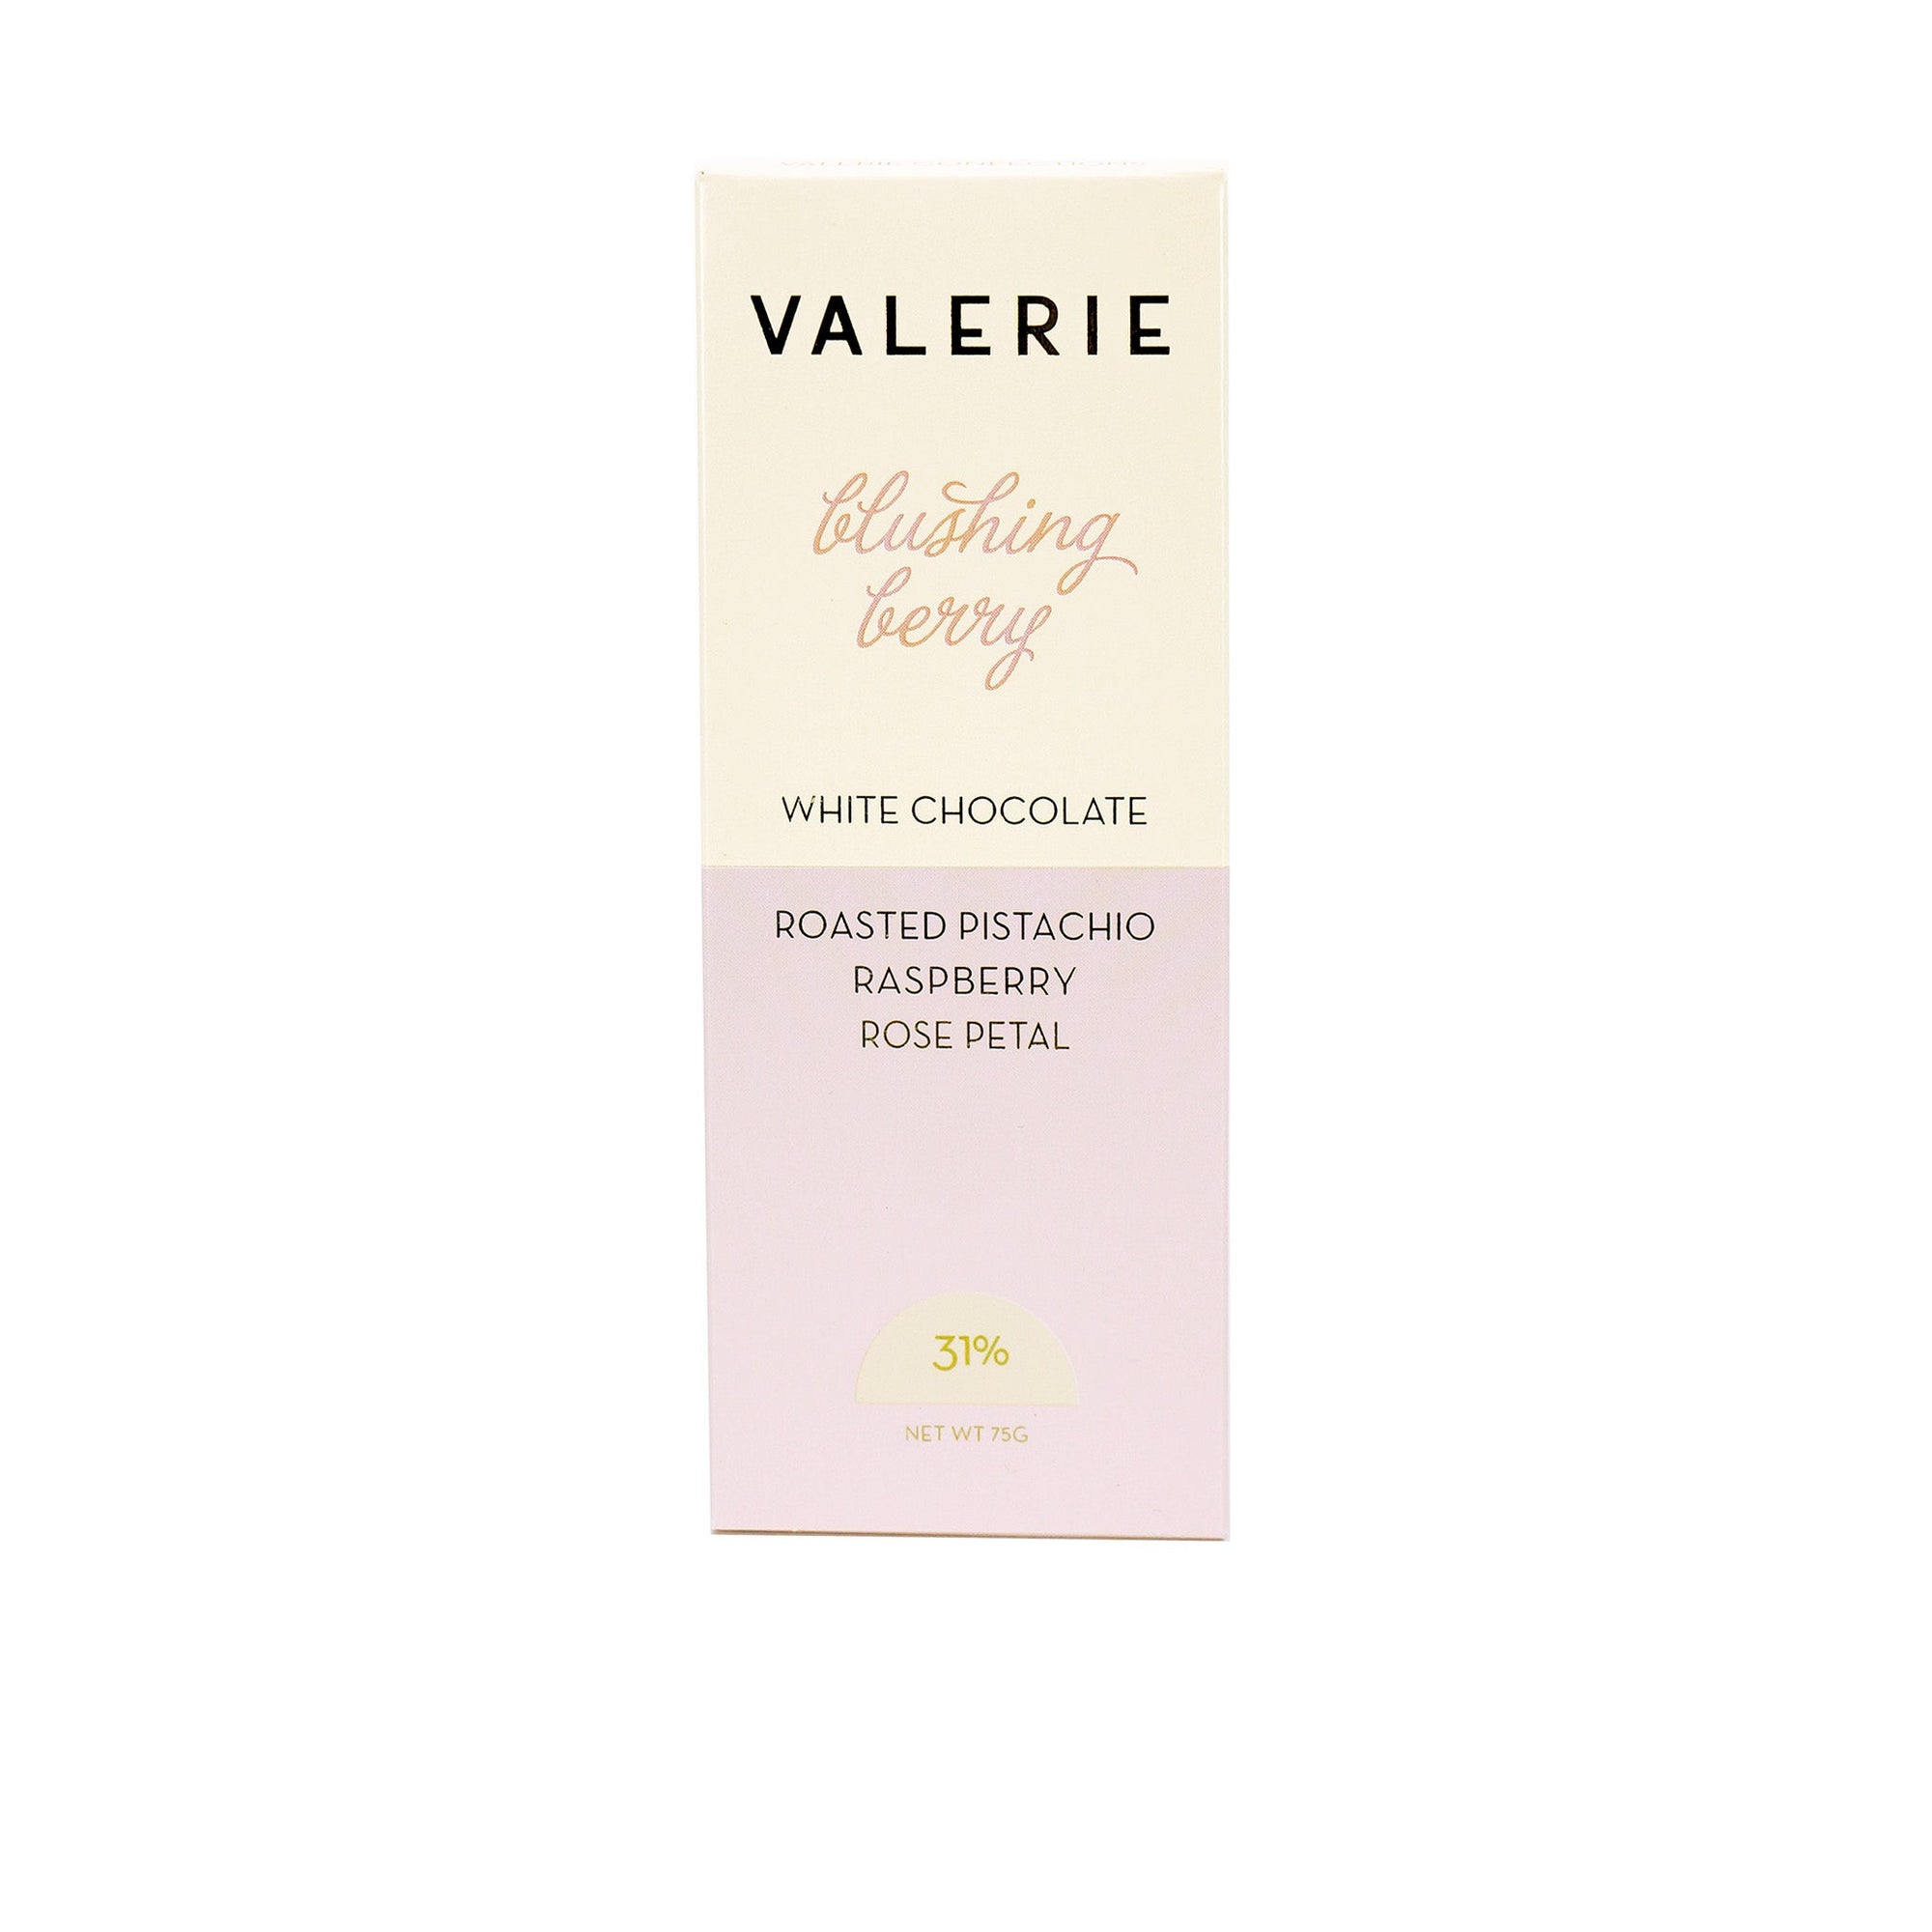 Valerie Blushing Berry 31% white chocolate bar with roasted pistachios, raspberries, and rose petals.